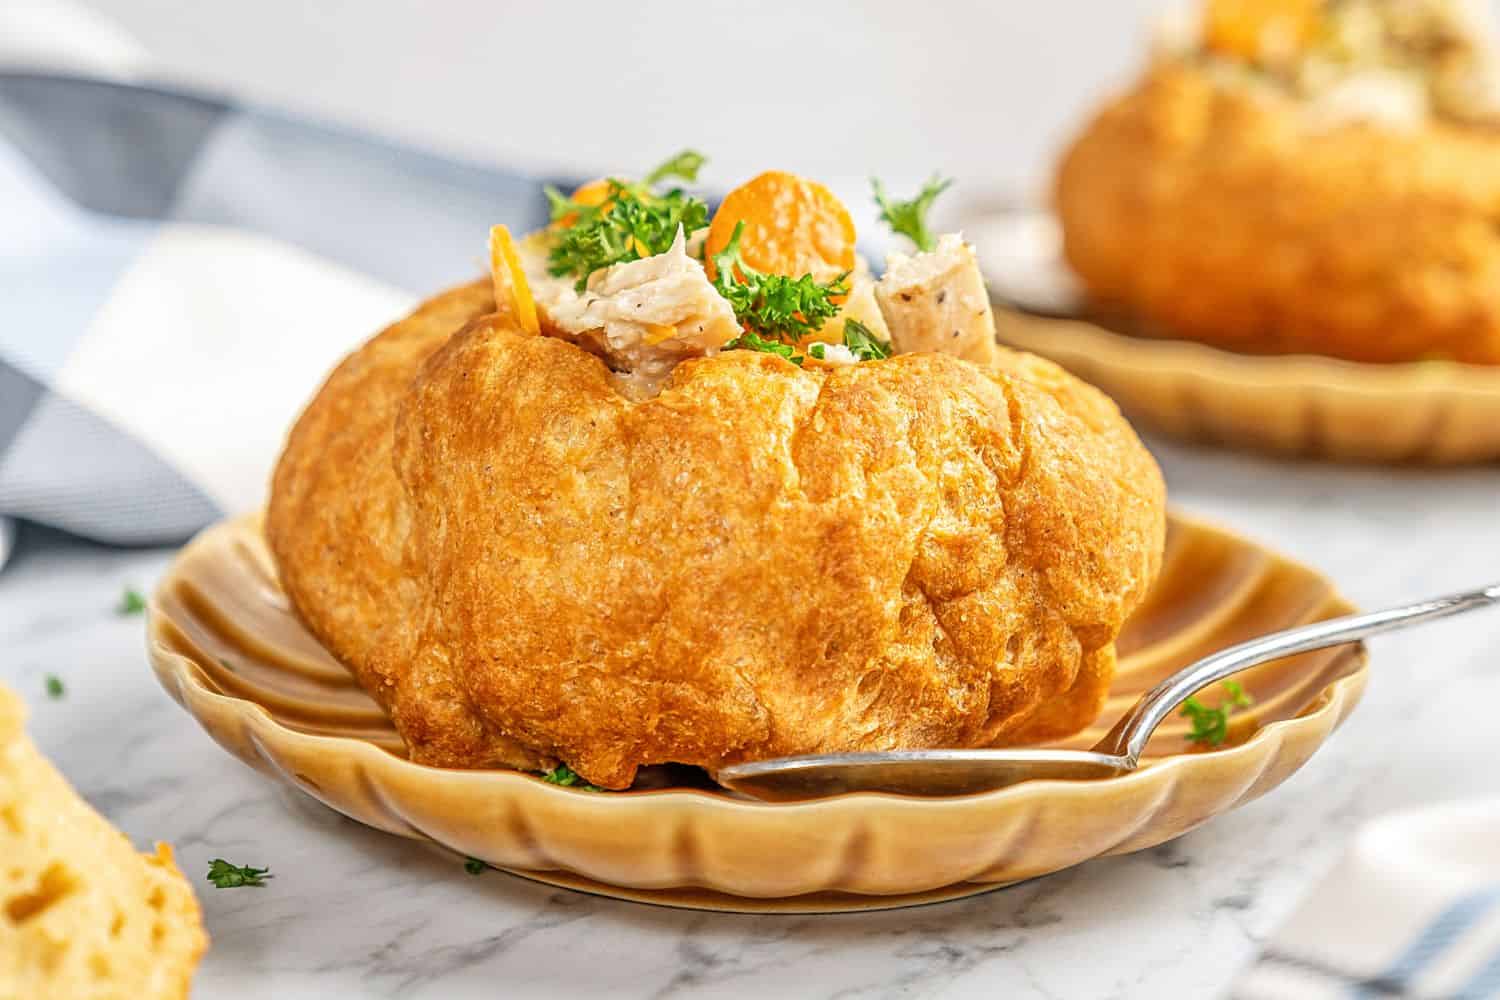 A gluten-free bread bowl on a tan scallop-edged plate with a spoon filled with chicken and vegetables.